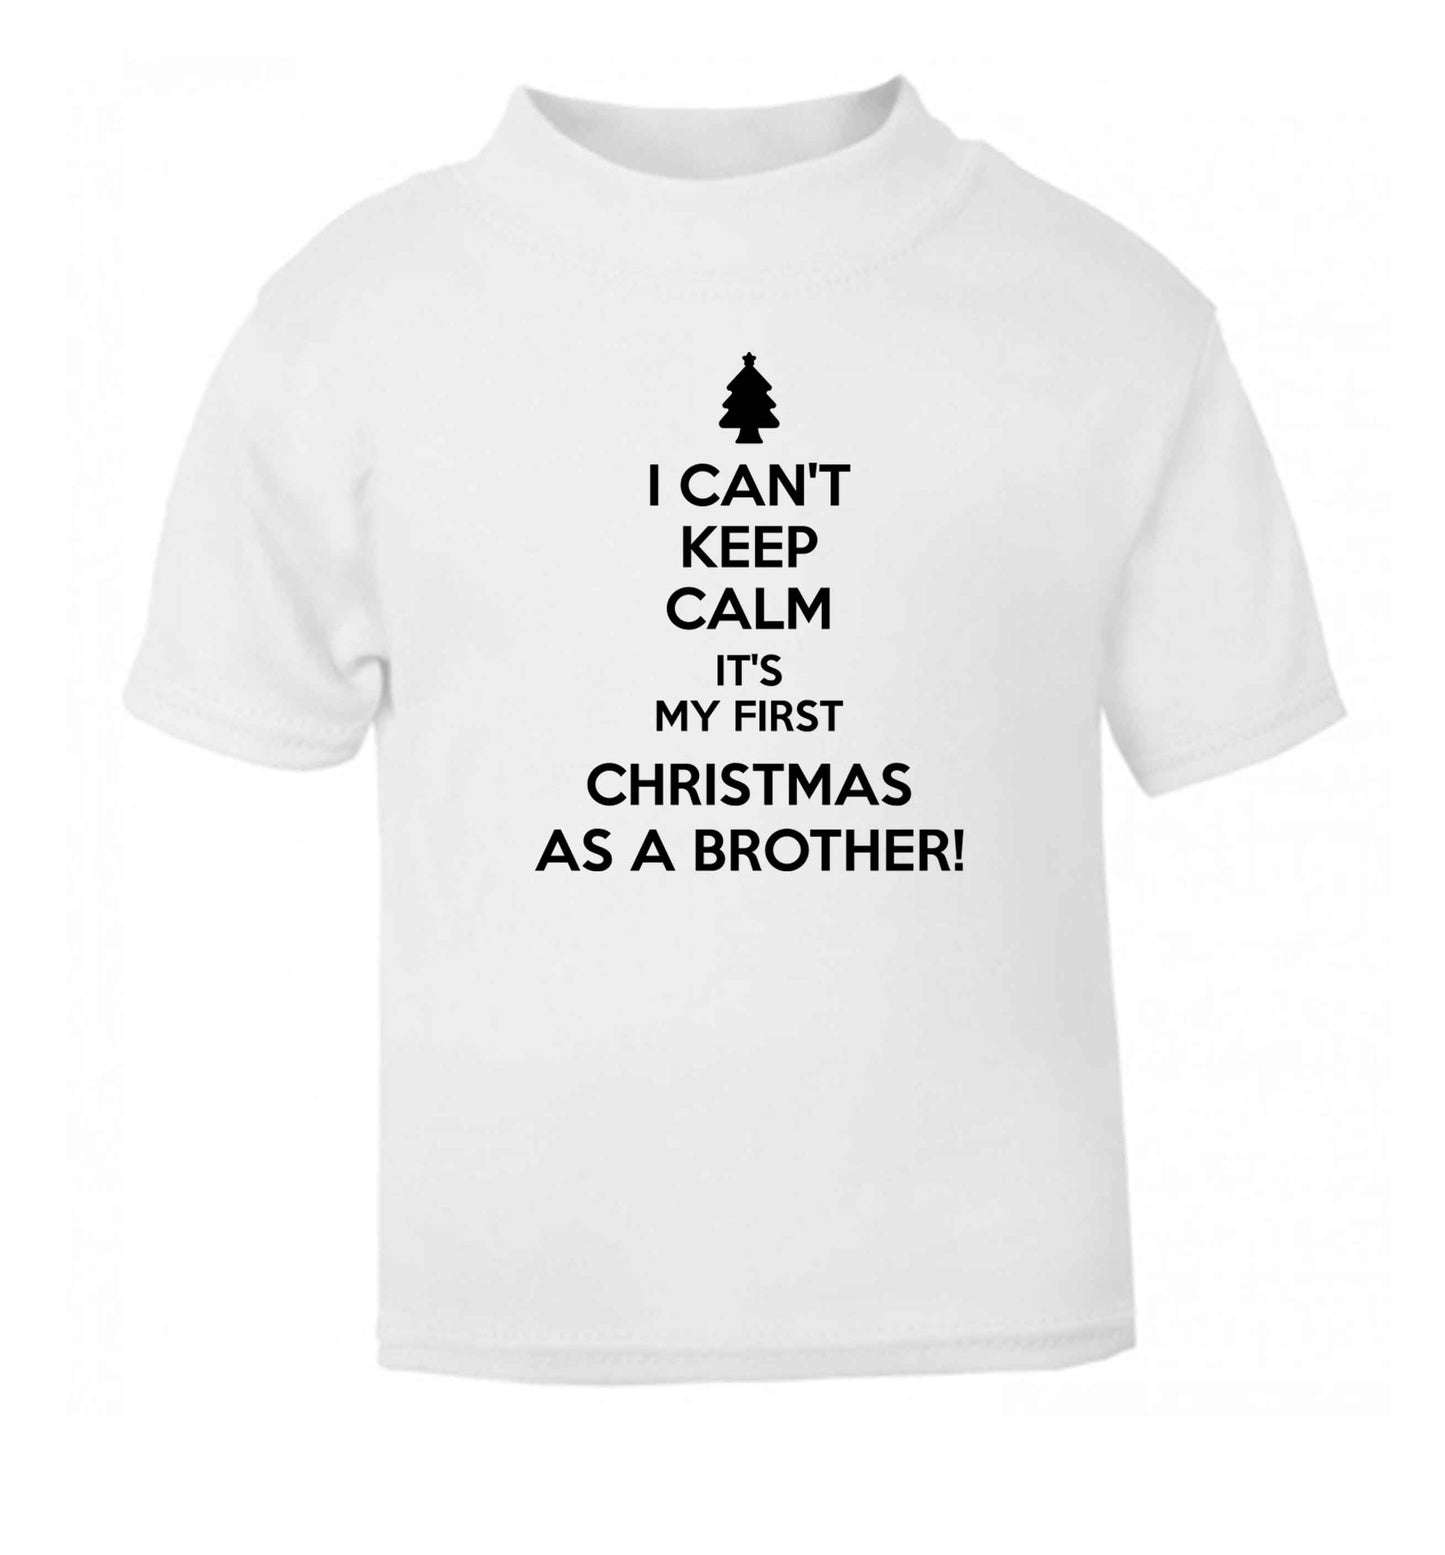 I can't keep calm it's my first Christmas as a brother! white Baby Toddler Tshirt 2 Years